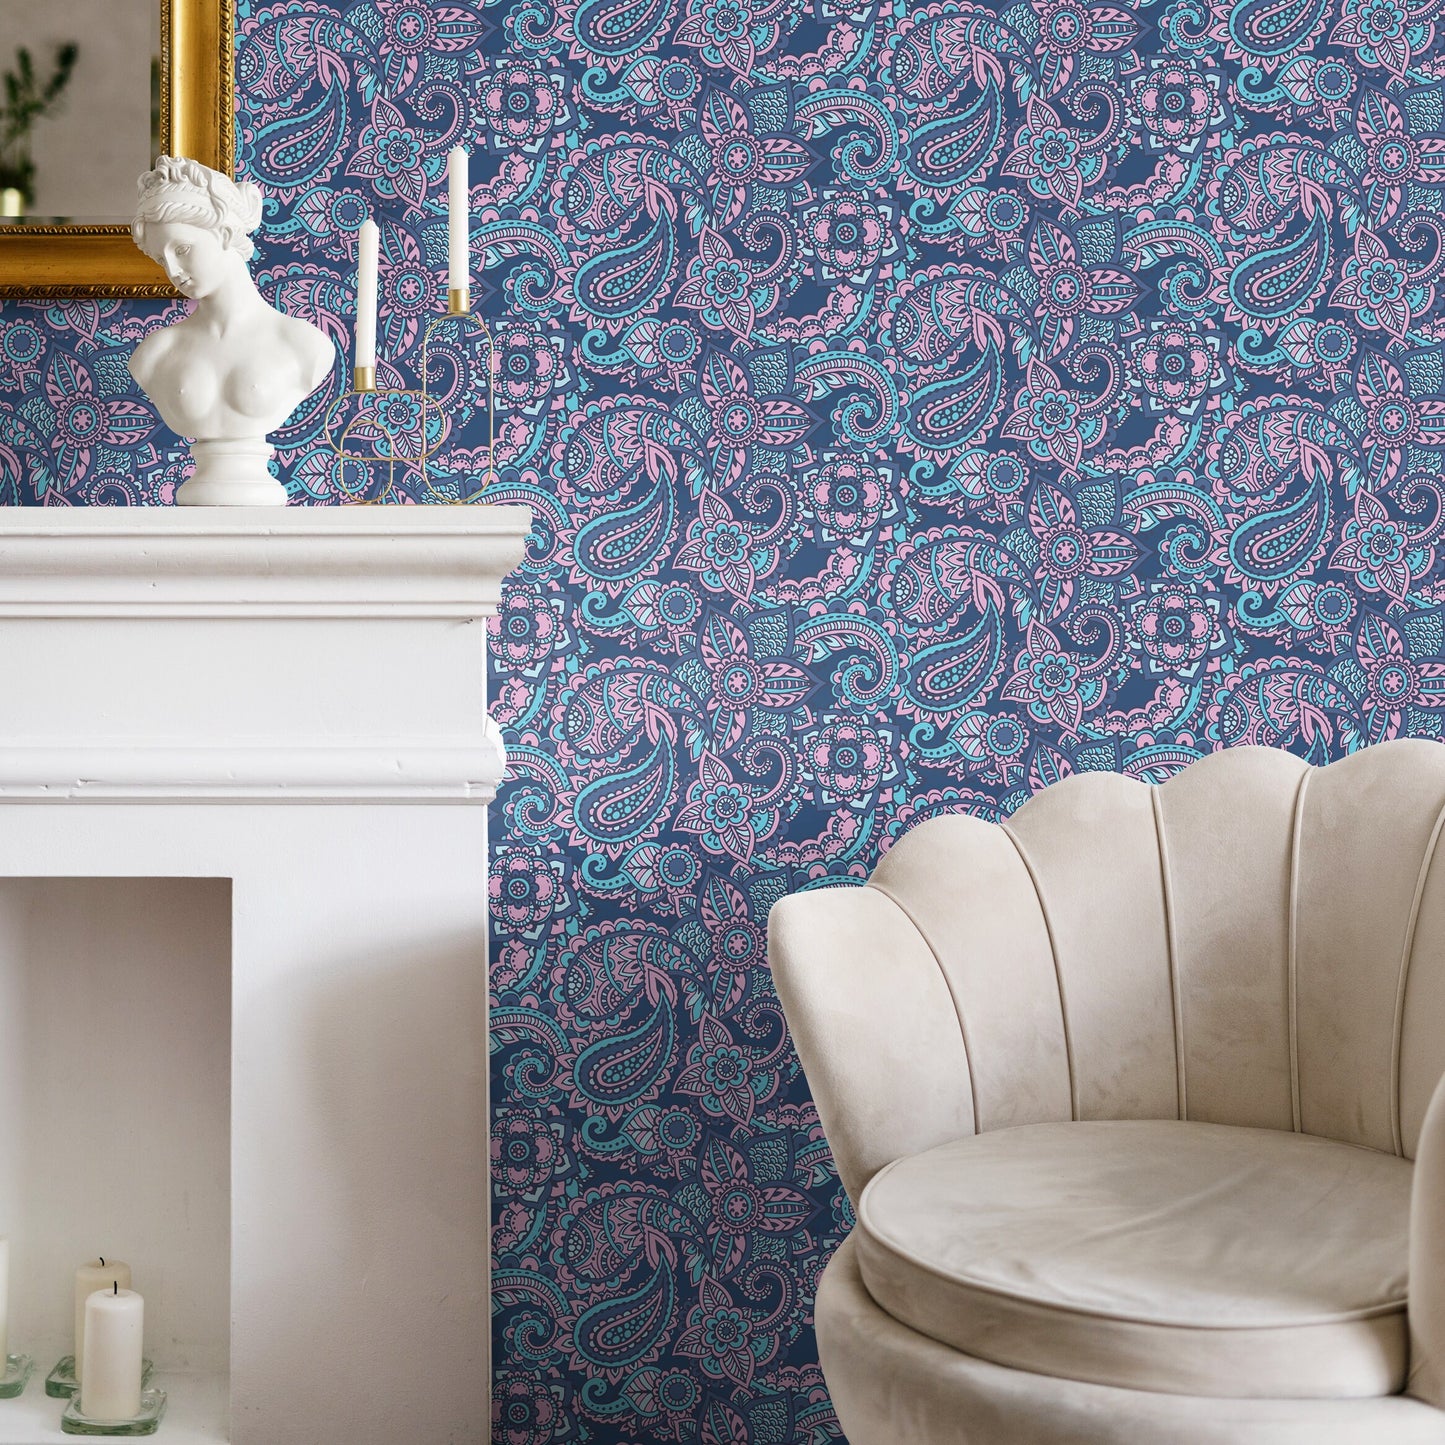 Contemporary Flowers Wallpaper - Removable Wallpaper Peel and Stick Wallpaper Wall Paper - B382